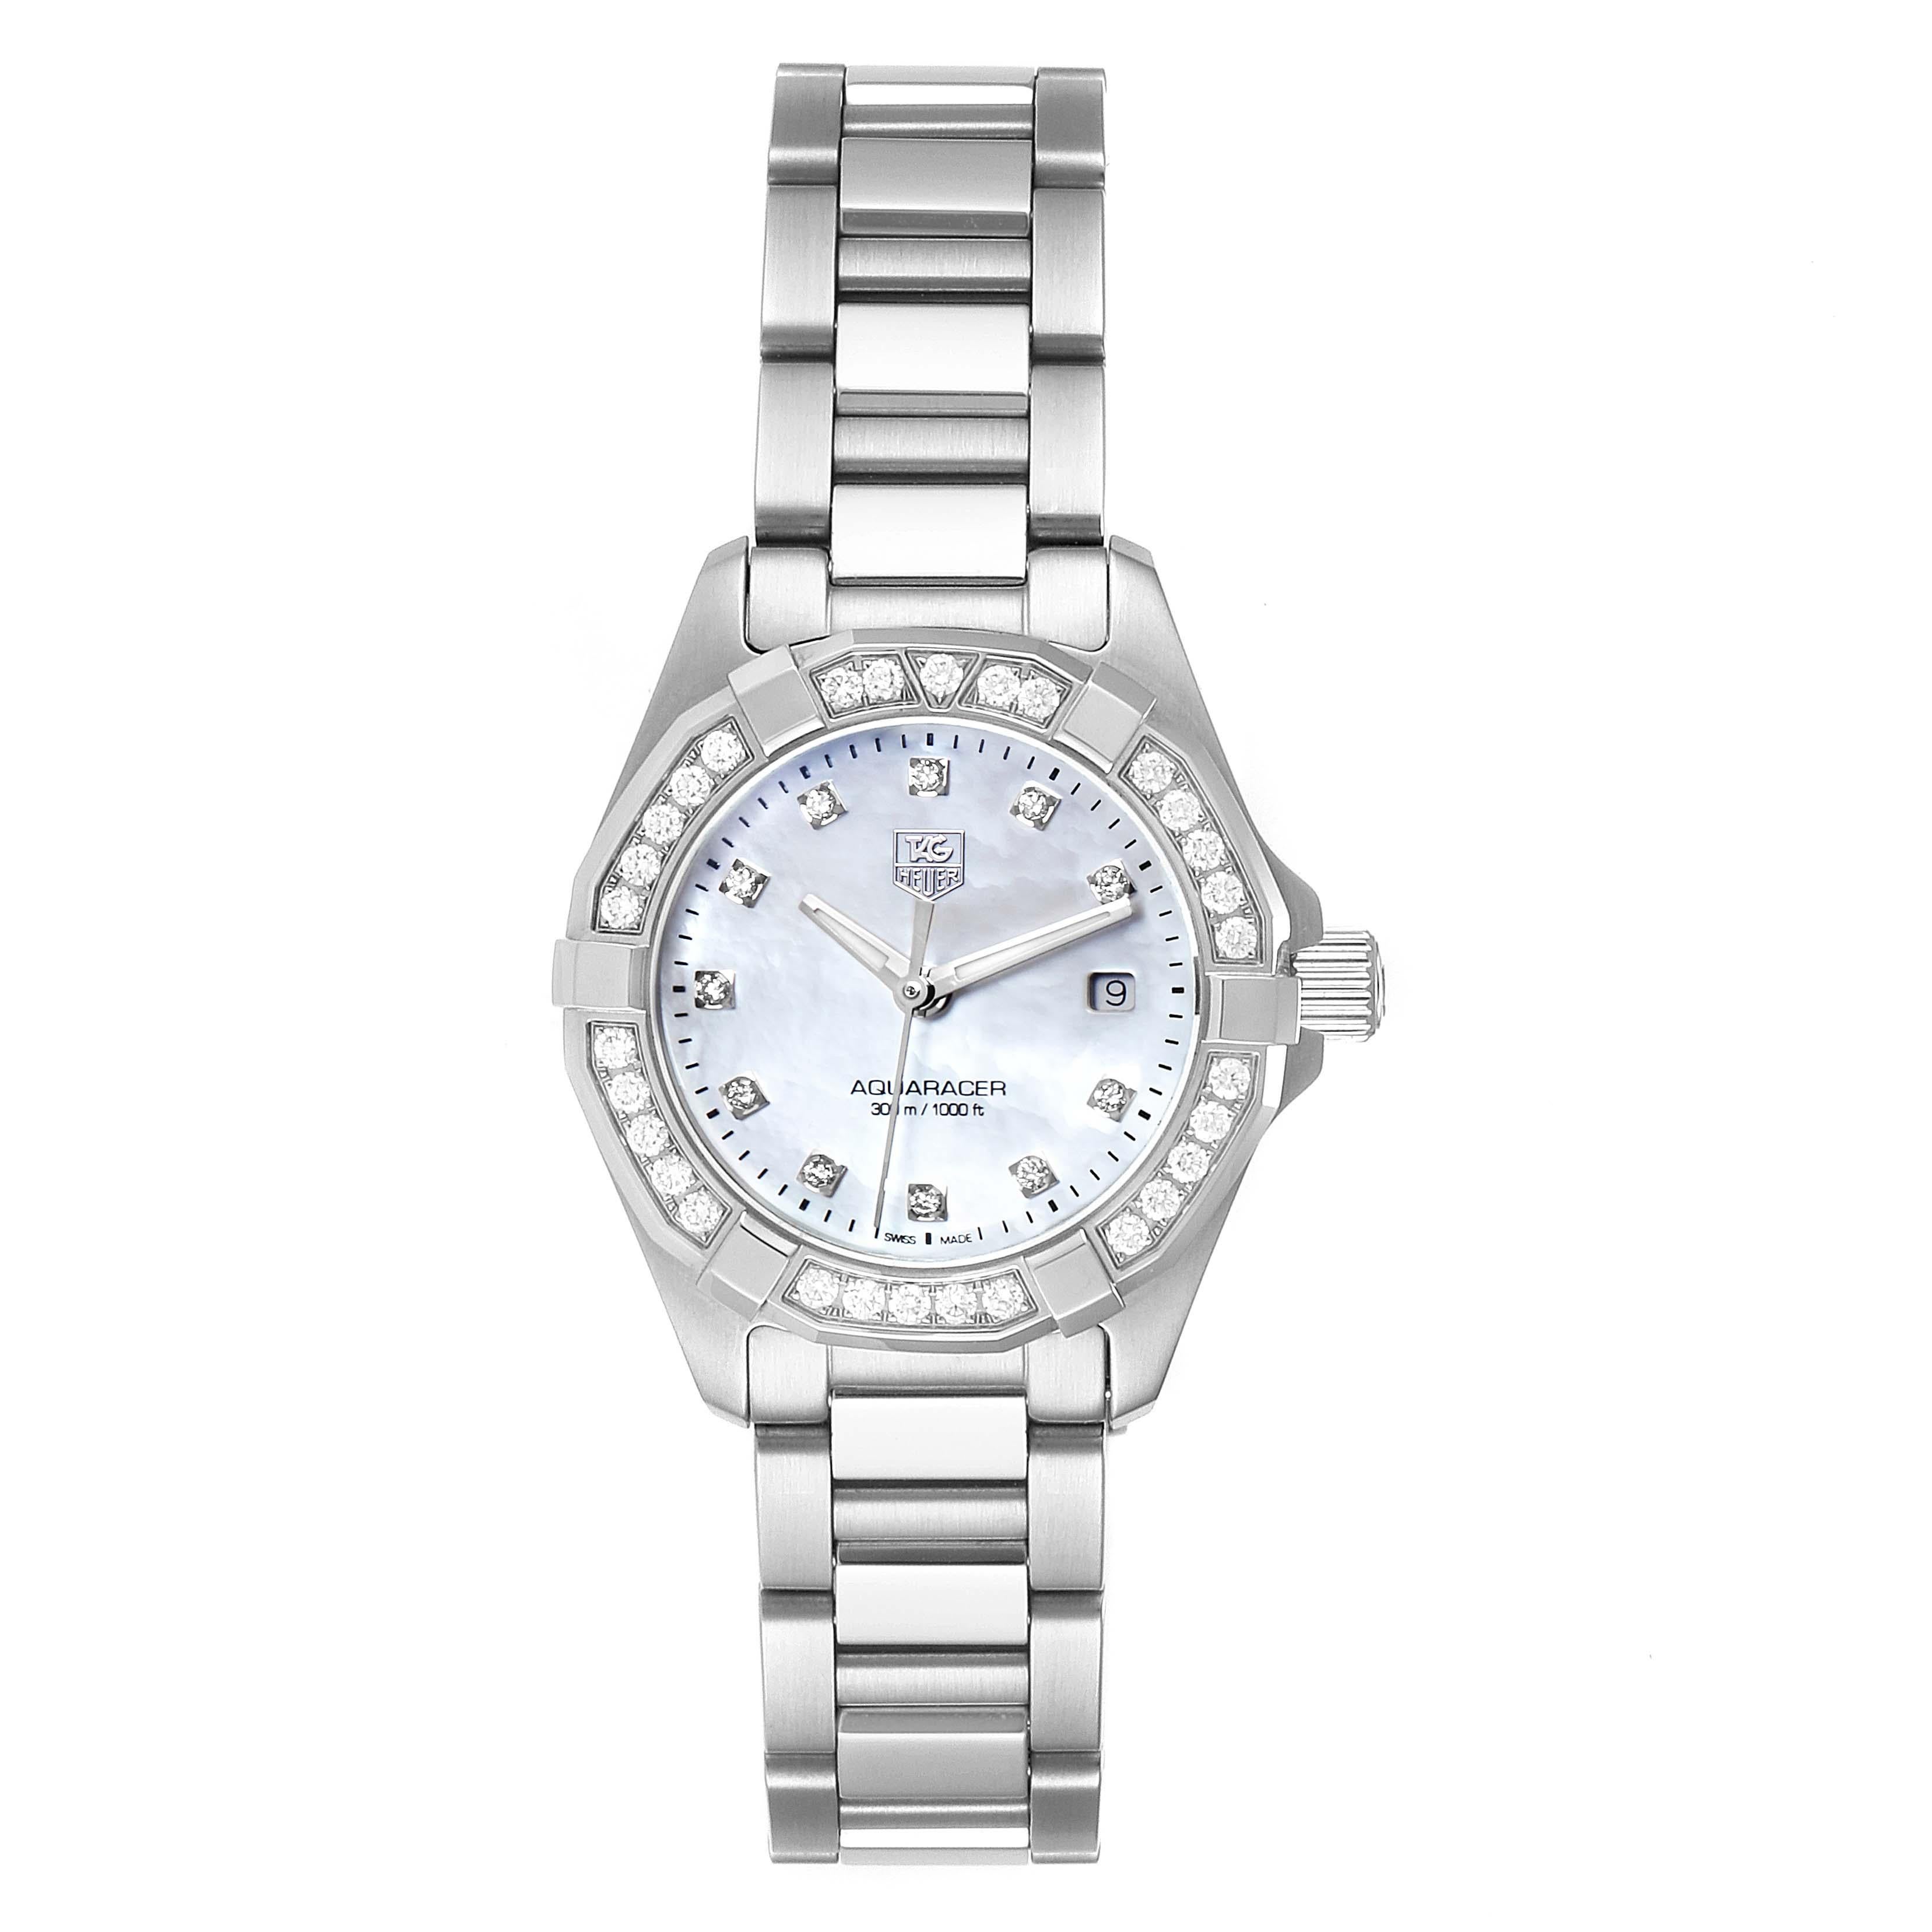 TAG Heuer Aquaracer Mother of Pearl Diamond Ladies Watch WAY1414 Box Card. Quartz movement. Stainless steel and 18K yellow gold case 27.0 mm in diameter. Unidirectional rotating diamond bezel. Scratch resistant sapphire crystal. Mother of Pearl dial